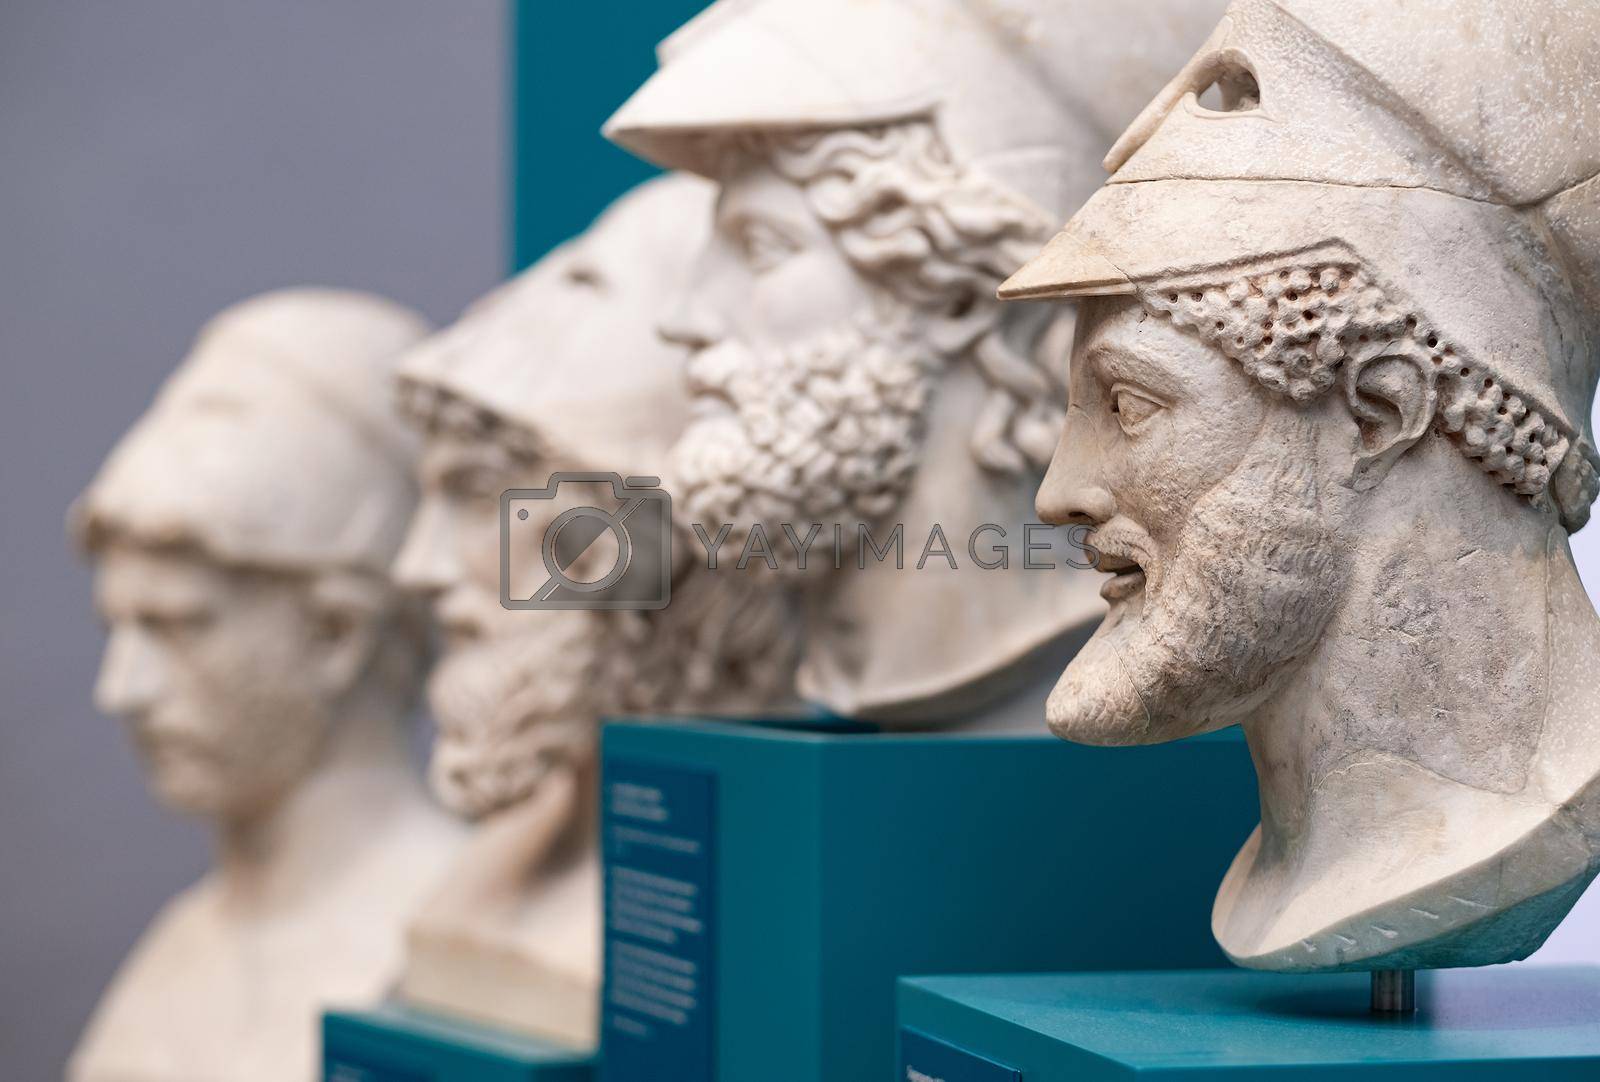 Berlin, Germany - 18 September 2019: Famous busts of miltiades in Berlin Altes museum. Ancient sculptures at exibition in Germany